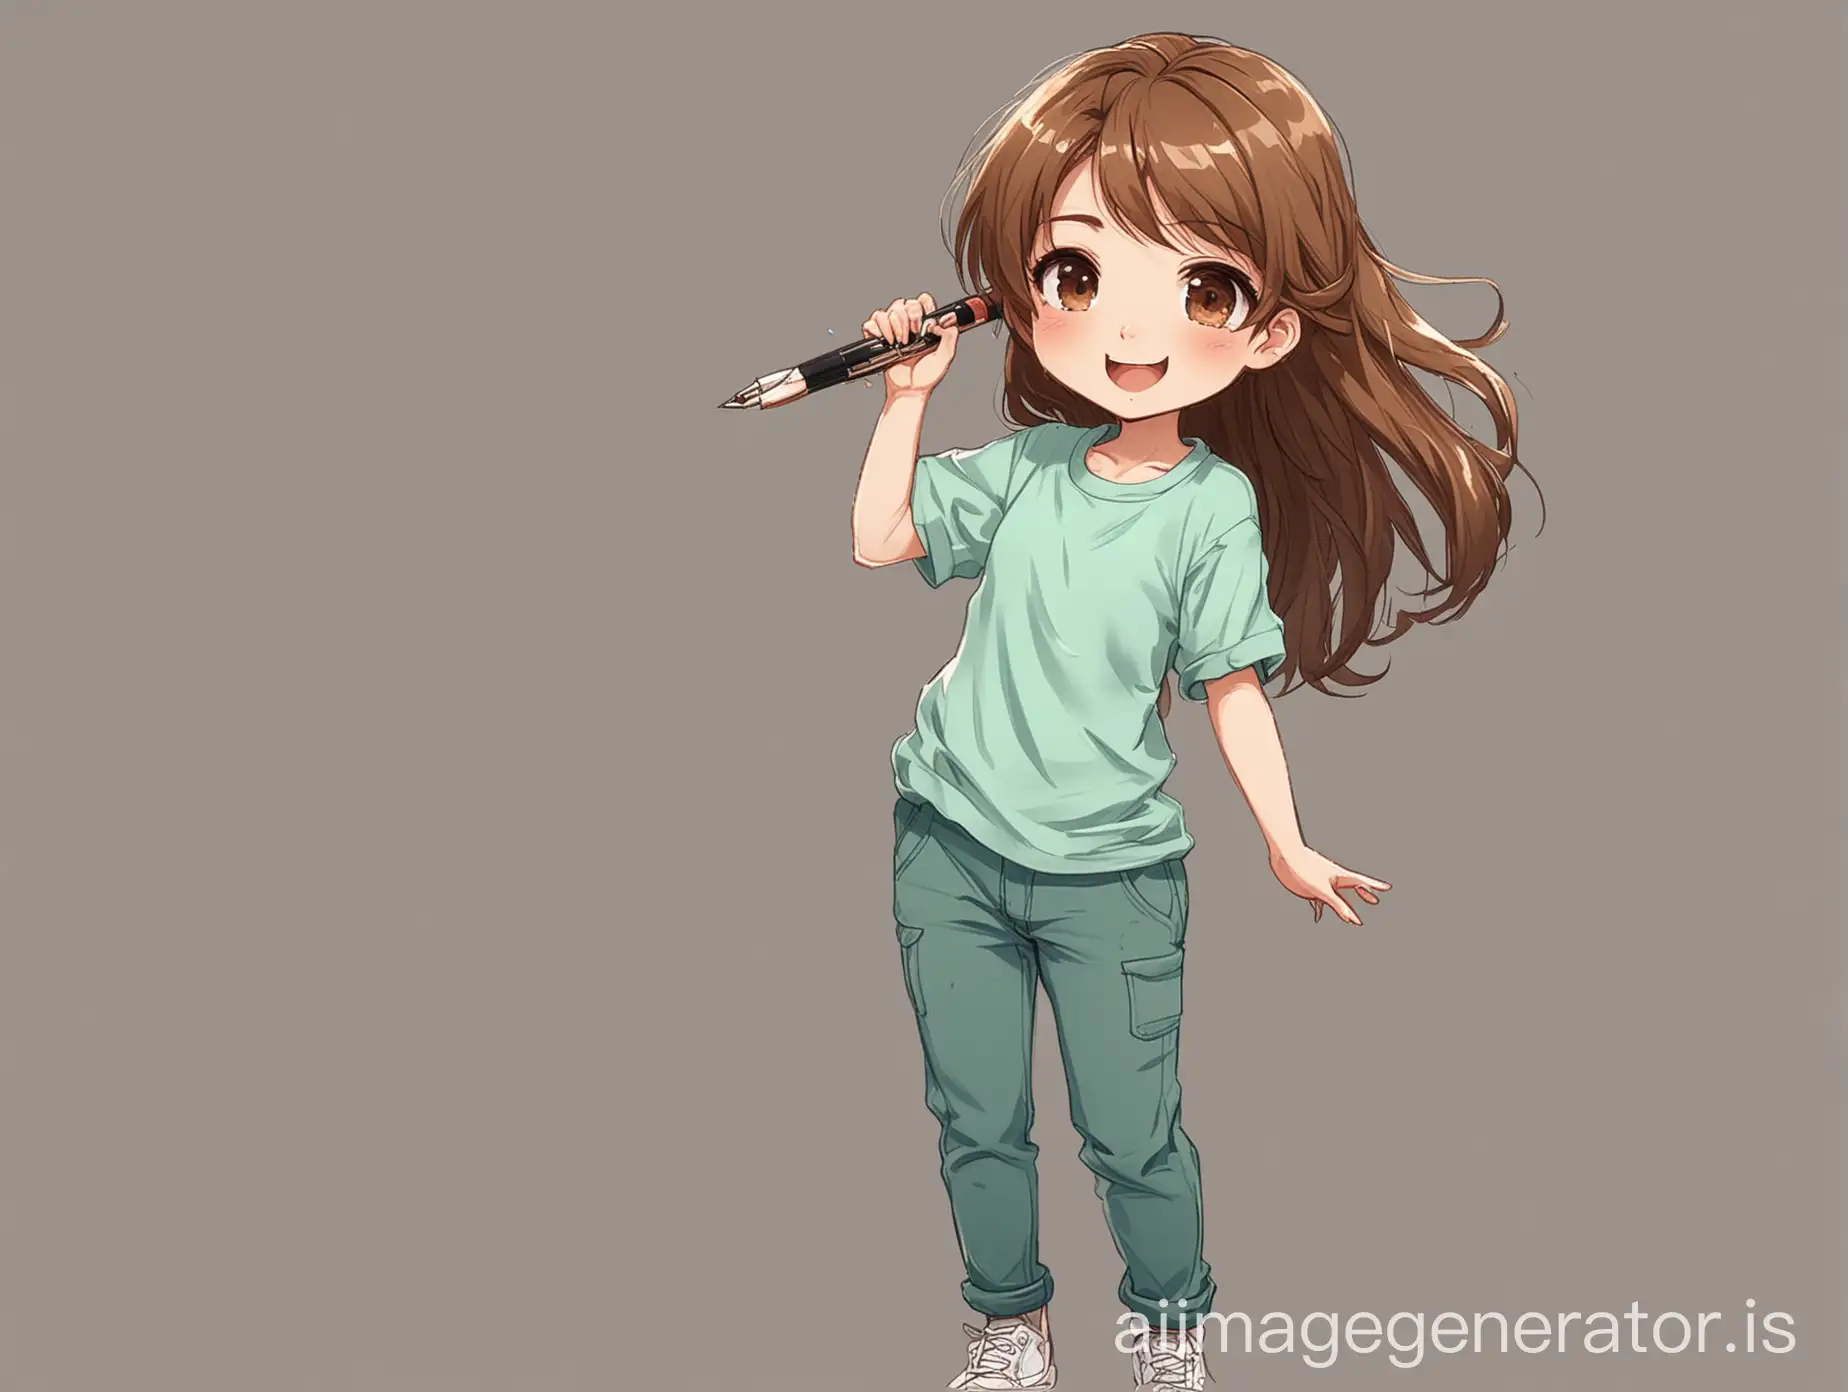 A young chibi-style illustration with anime style girl, smiling and She is holding a large pen or stylus up triumphantly, as if to celebrate creativity or artistic accomplishment while standing and lifting her and in te sky and in anime style child. She has long-length brown hair and large, expressive brown eyes. She is smiling warmly. She is wearing a loose full sleeves, Seafoam green color t-shirt and matching long pants and sneakers. The overall mood should be cheerful and endearing. The background should be plain and white, keeping the focus on the character.